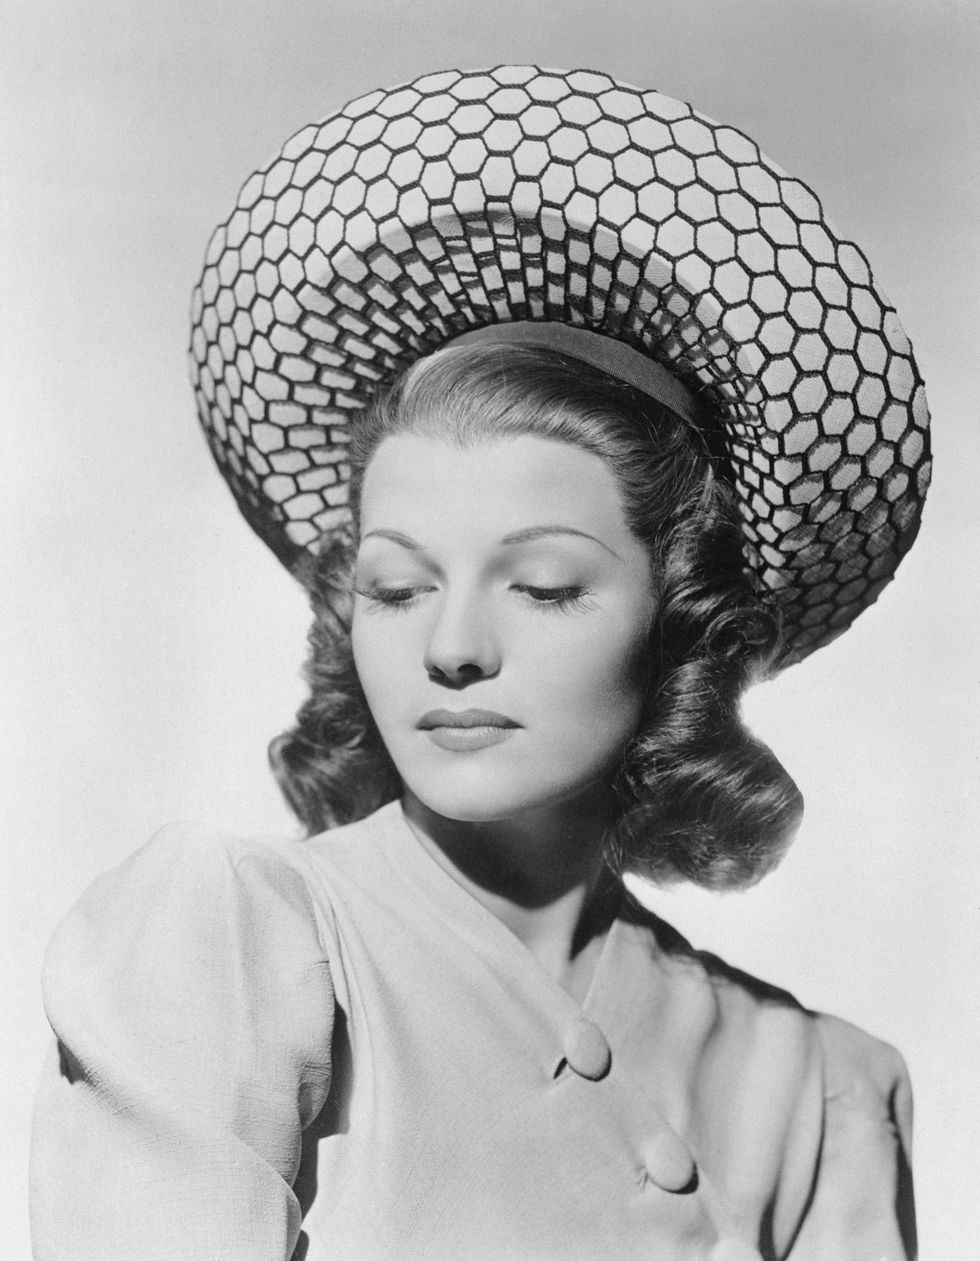 rita hayworth wears a geometric patterned hat and a light colored blouse